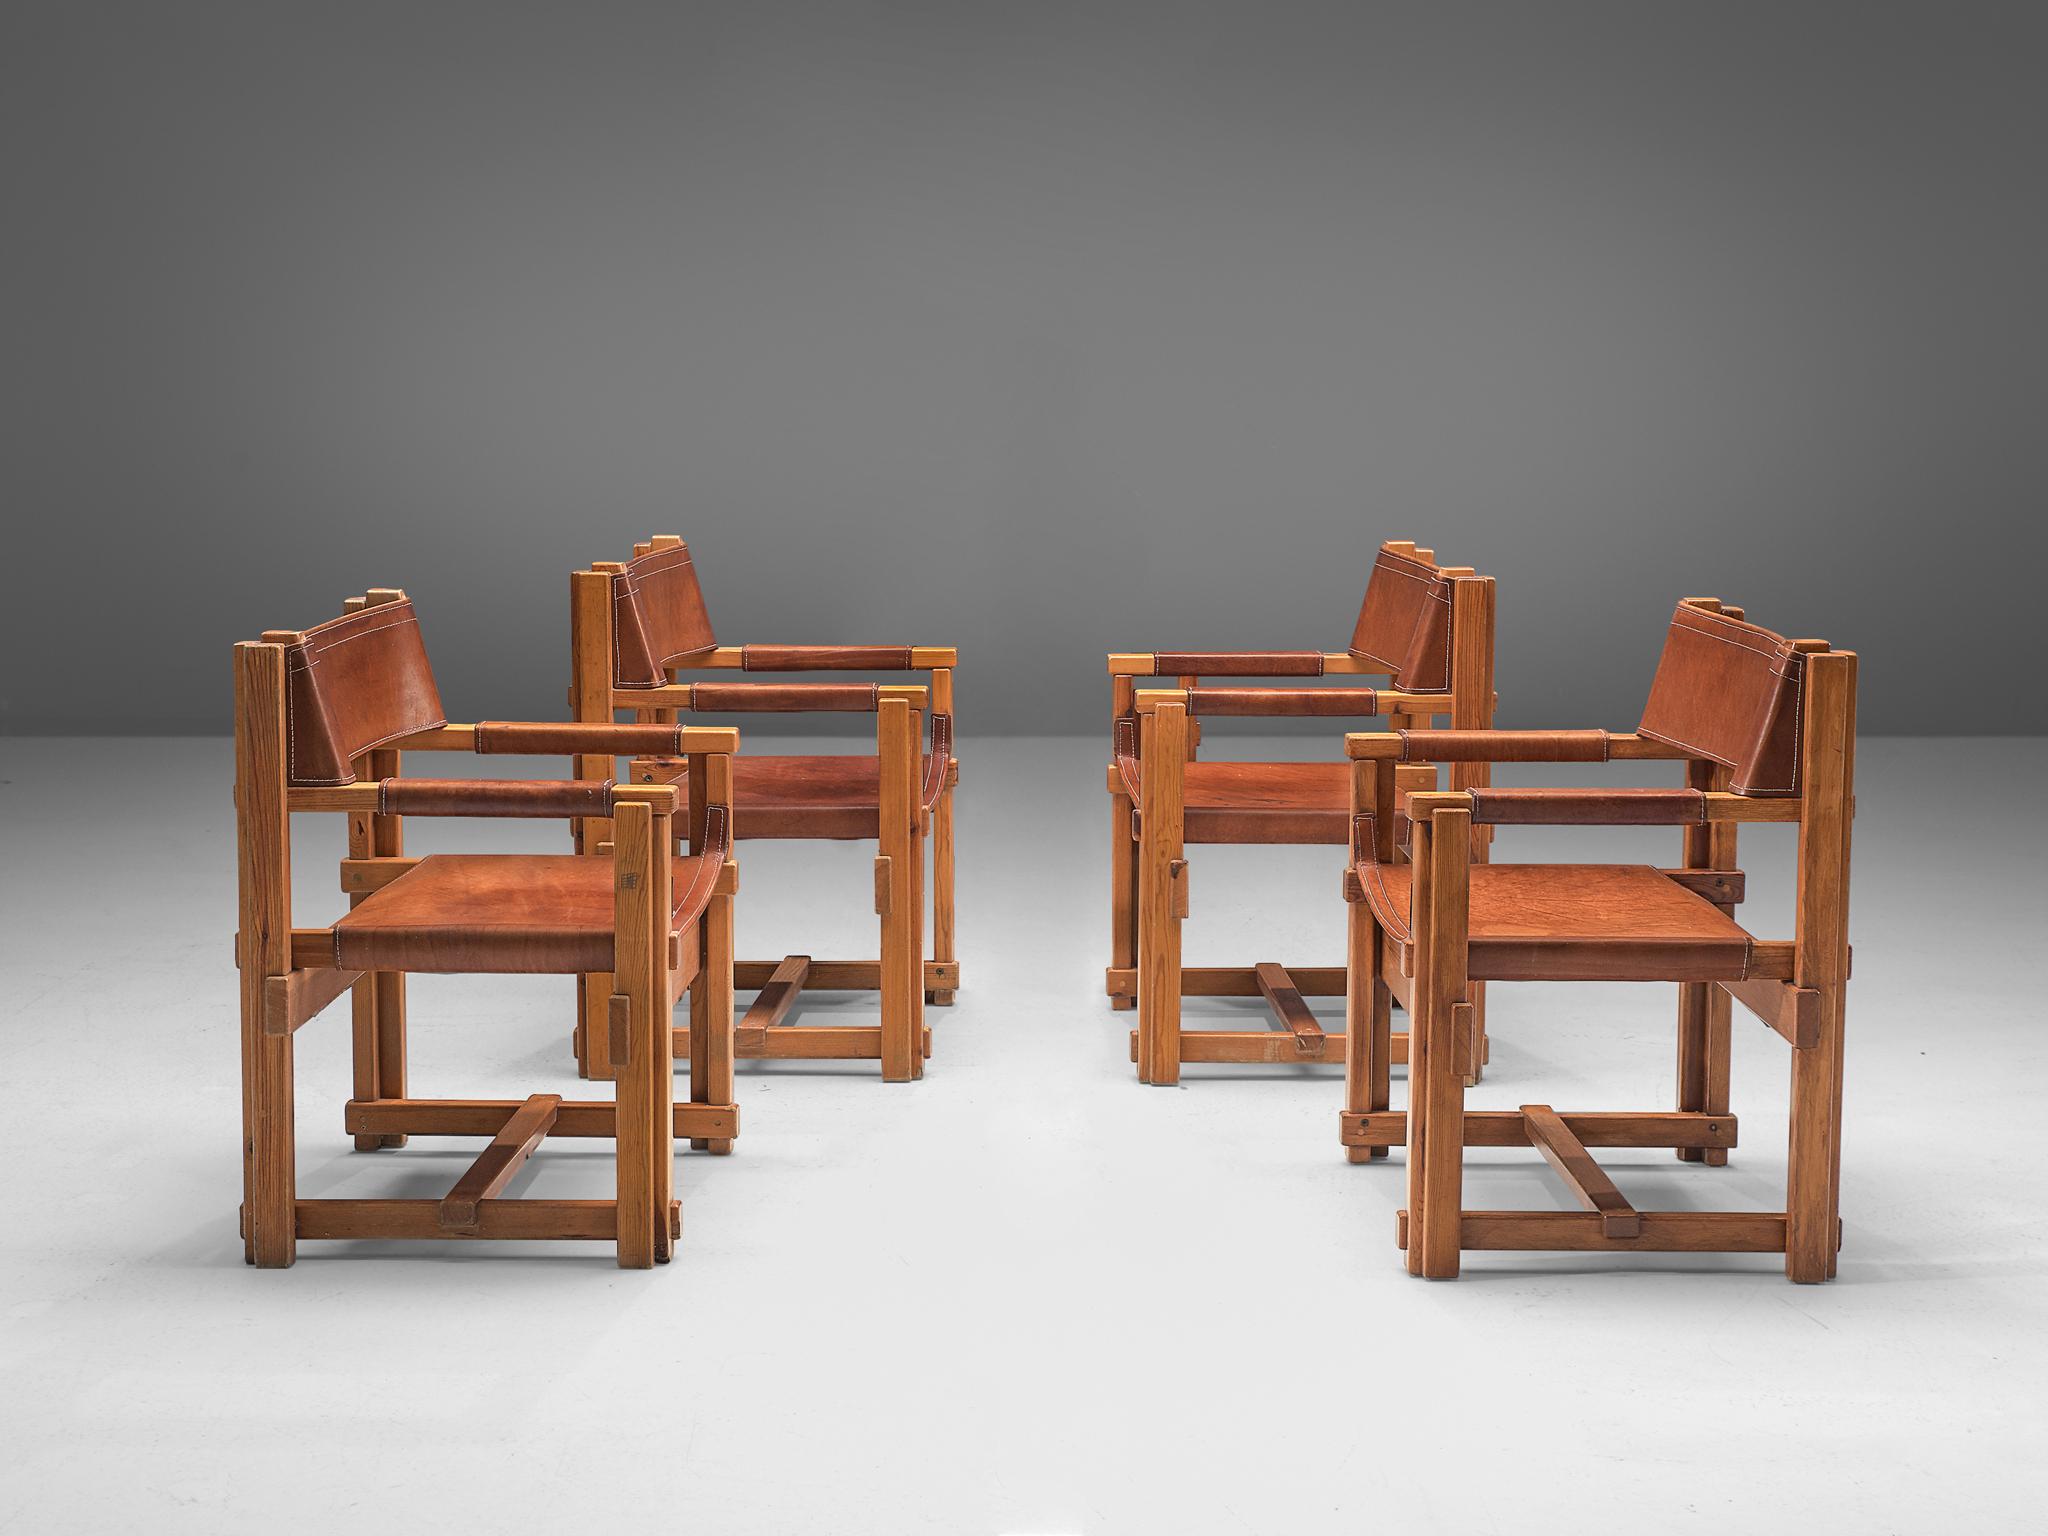 Joan Pou, armchairs, pine, leather, Spain, 1960s

This set of four armchairs from Spain is strict, purist and belongs to the rationalist movement in Spain. The chairs feature an architectural frame, build up from only horizontal and vertical lines.